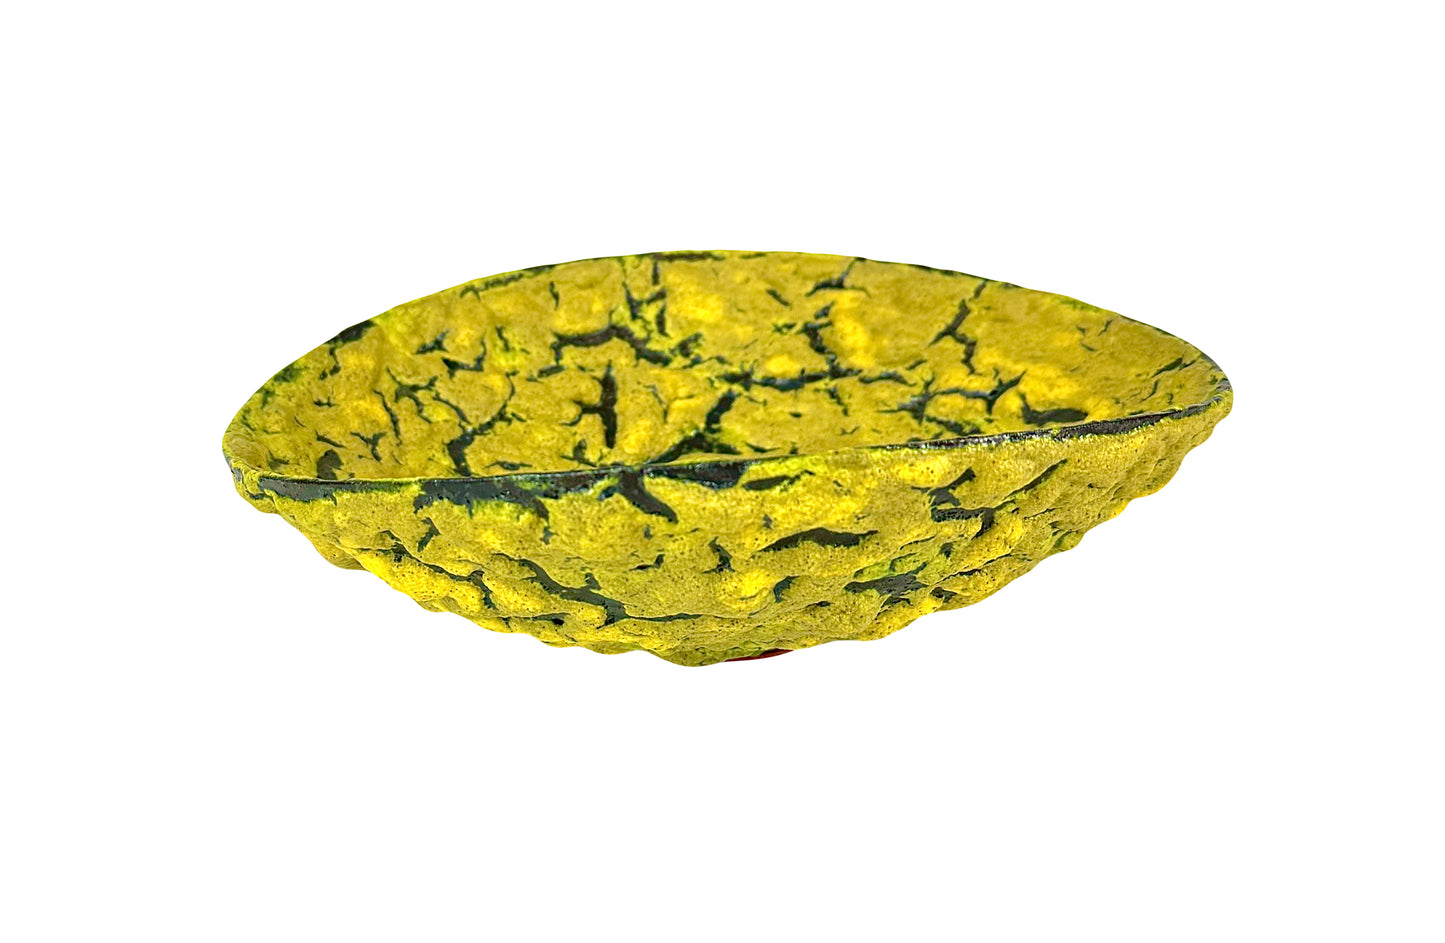 Matte Yellow Glaze Clam Bowel with Fissures